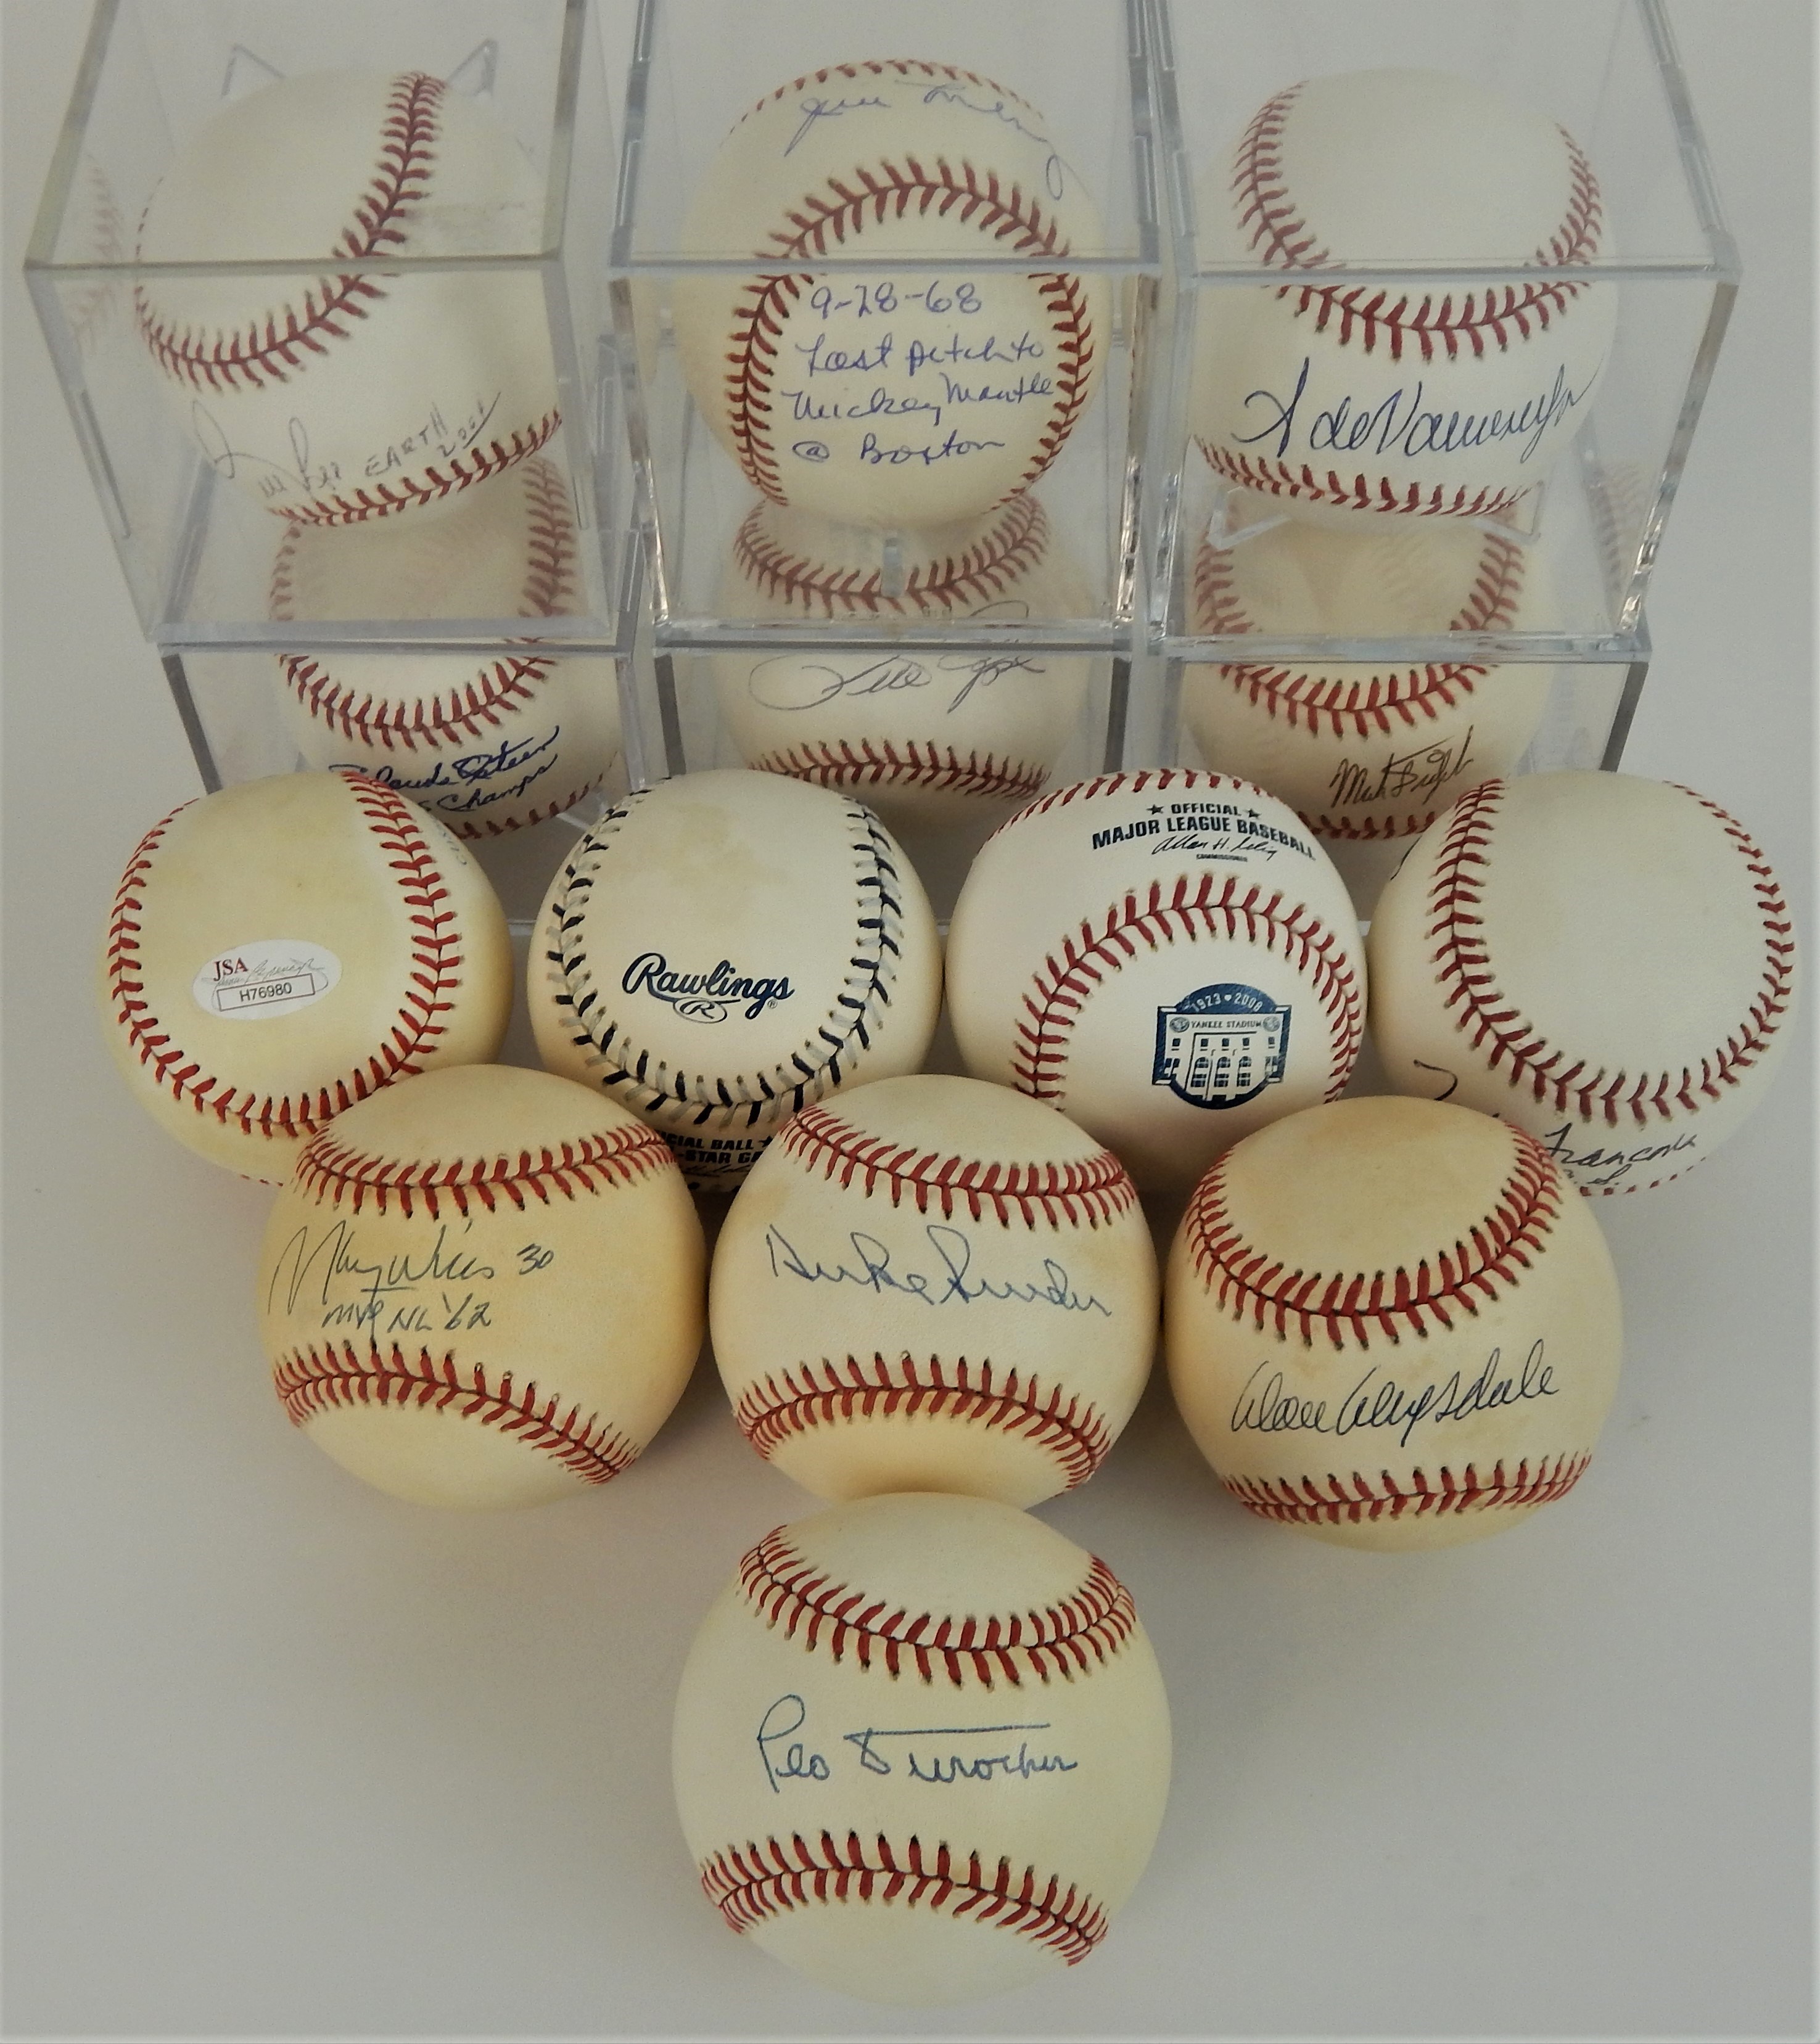 - Signed Baseball Collection featuring Drysdale, Snider, Durocher etc. (12)